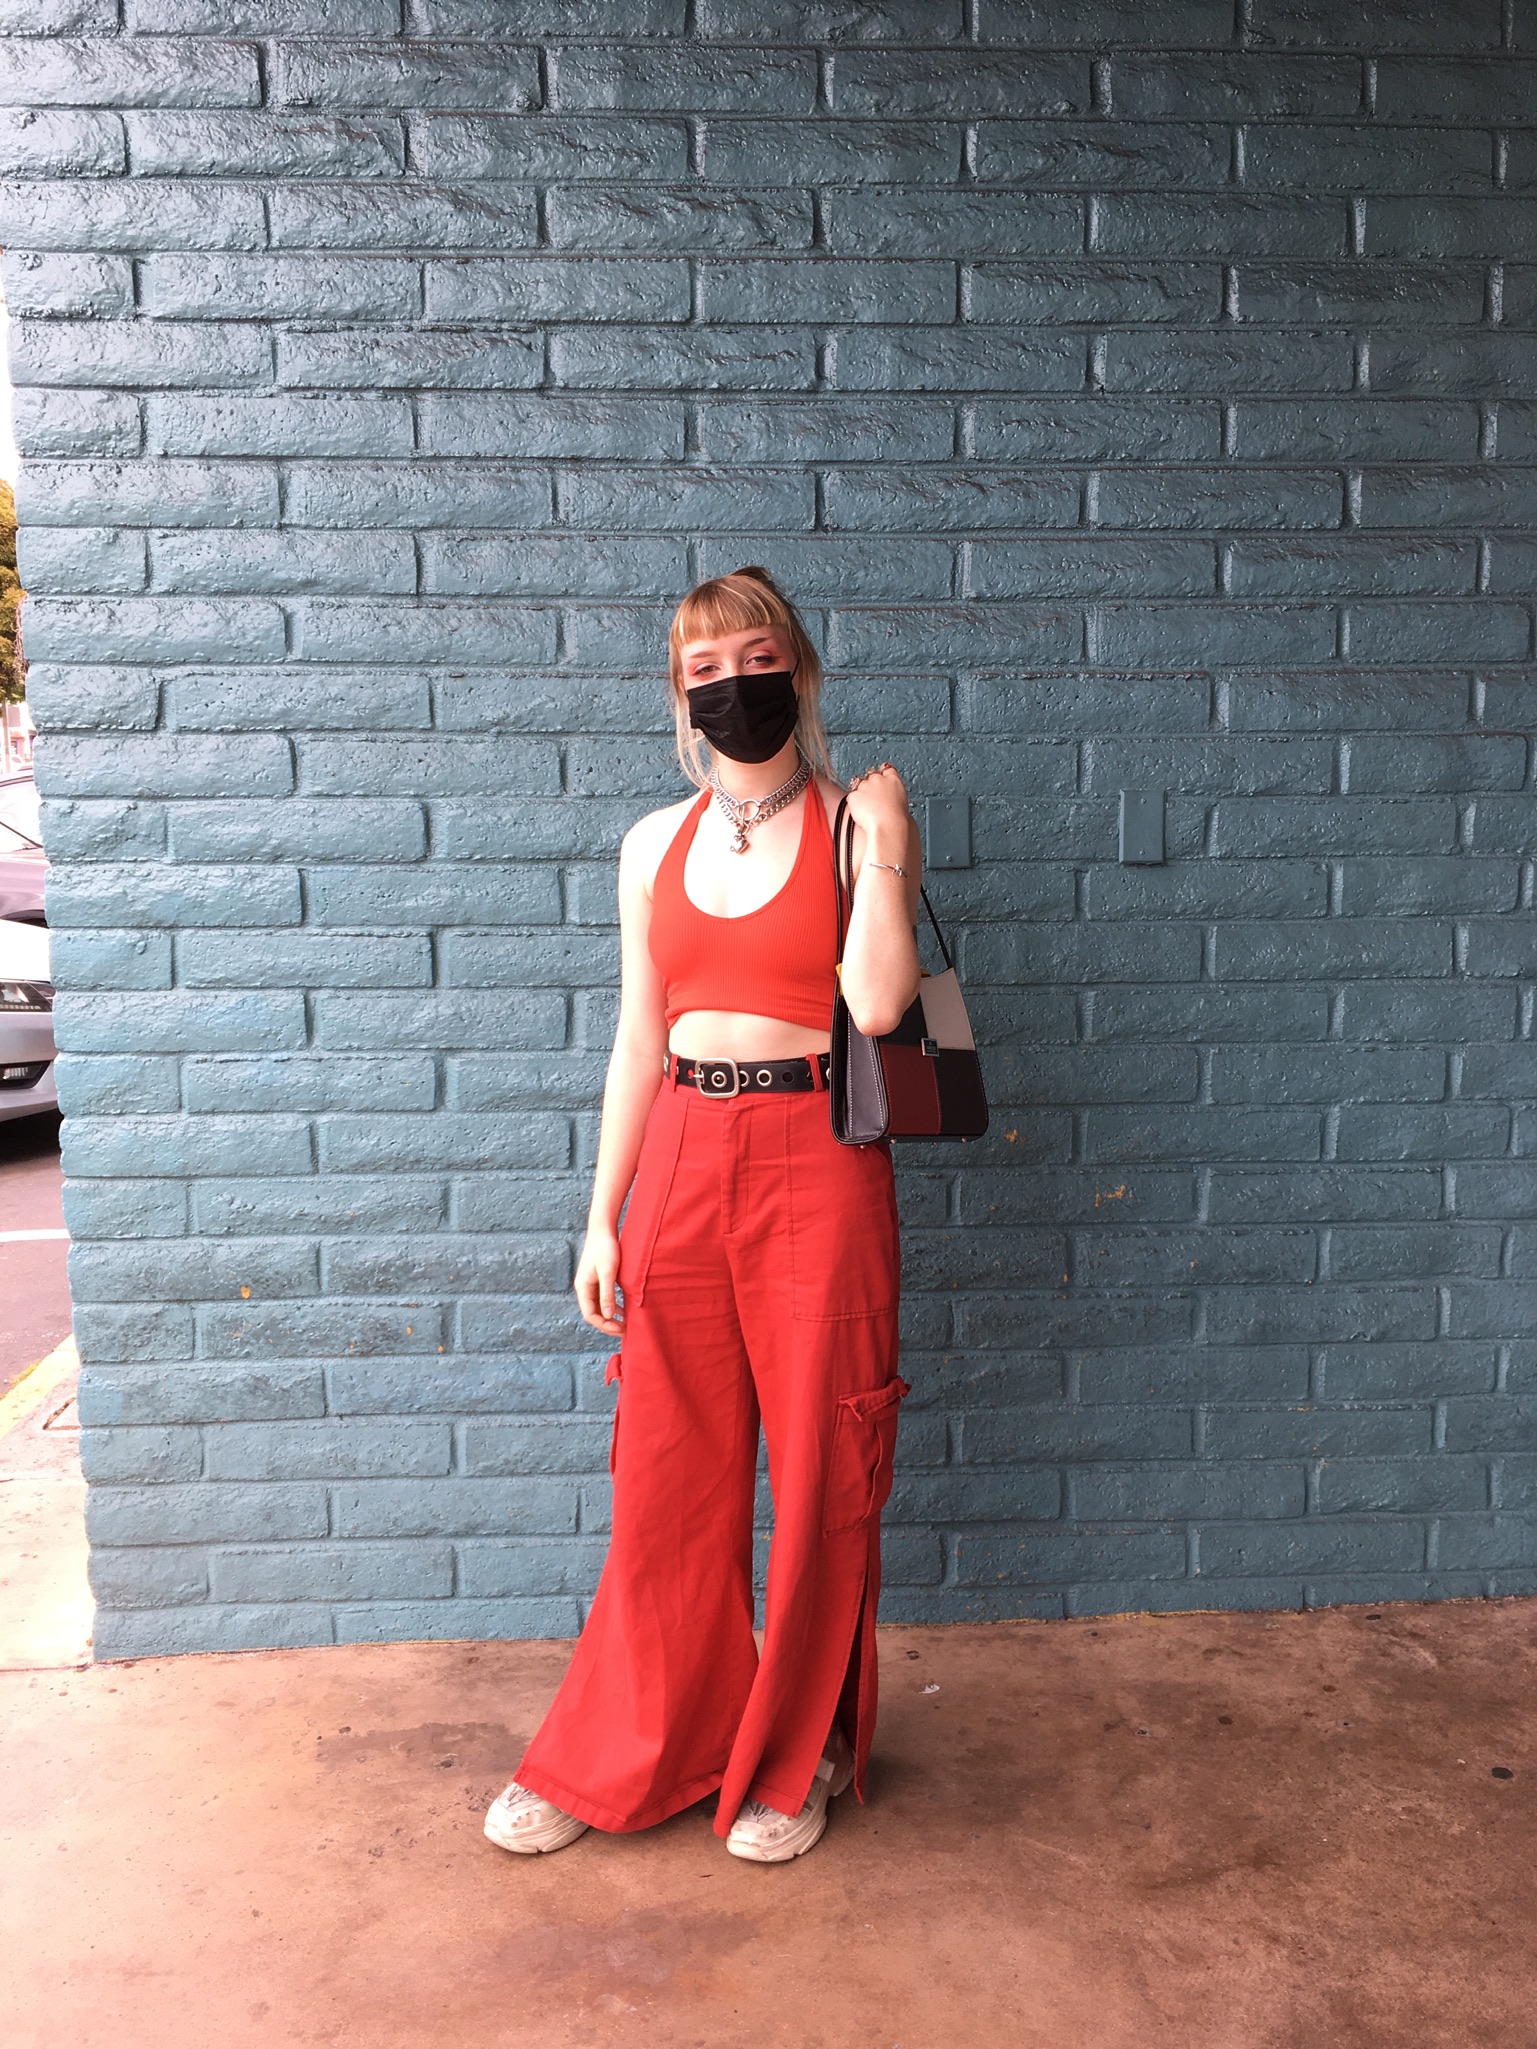 Person stands in front of teal wall wearing a black facemask, red halter top, silver chain necklaces, red cargo pants and patchwork leather shoulder bag